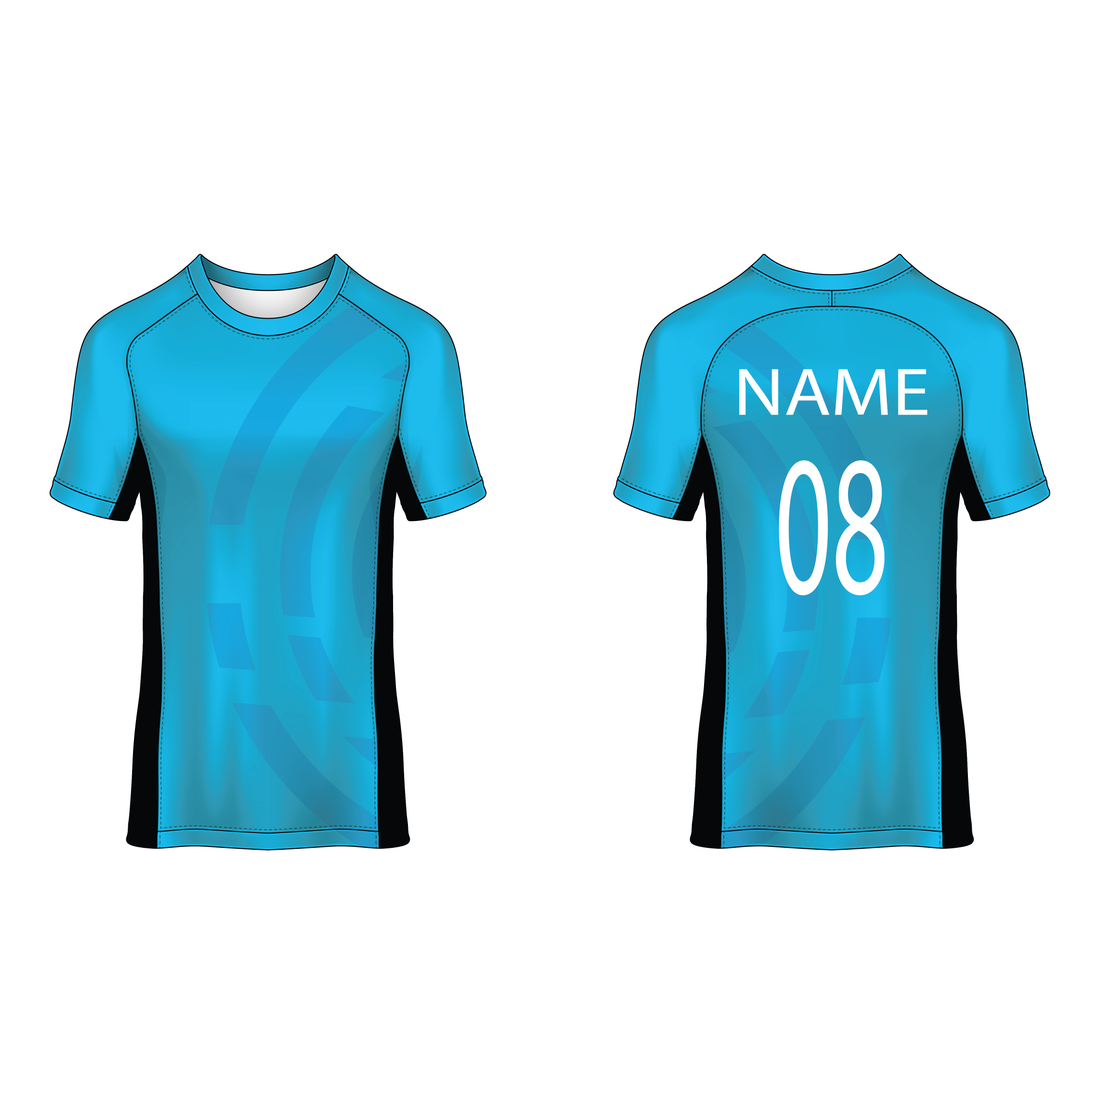 NEXT PRINT All Over Printed Customized Sublimation T-Shirt Unisex Sports Jersey Player Name & Number, Team Name NP50000261